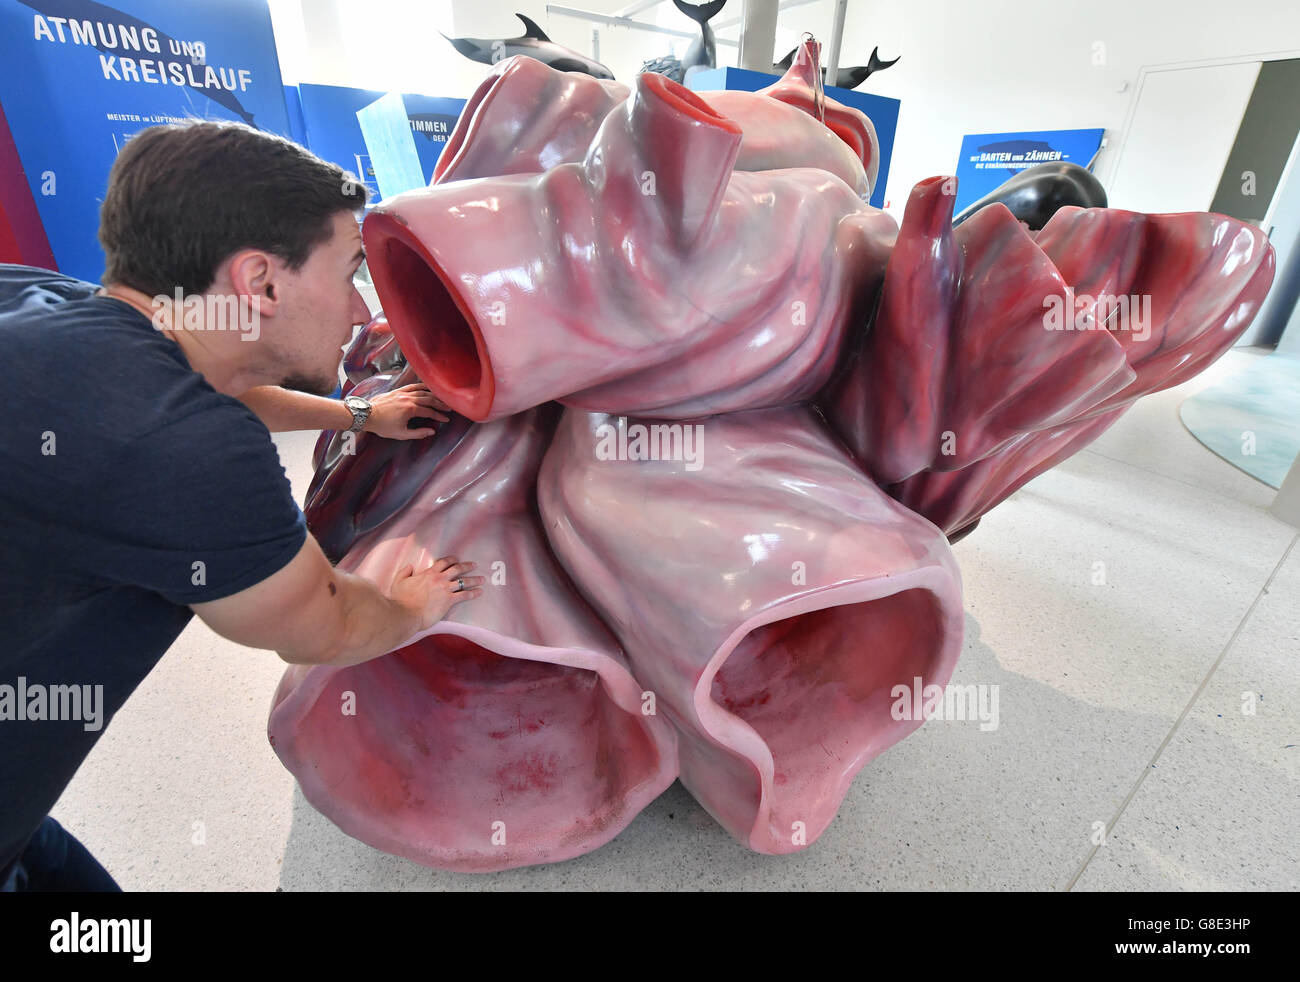 Karlsruhe, Germany. 28th June, 2016. A model of the heart of a blue whale on a scale of 3:1 can be seen at the Public Museum for Natural Science in Karlsruhe, Germany, 28 June 2016. The exhibition 'Wale - Riesen der Meere' (lit. 'Whales - Giants of the Sea') is open from 30 June 2016 until 29 January 2017 at the museum. PHOTO: ULI DECK/dpa/Alamy Live News Stock Photo